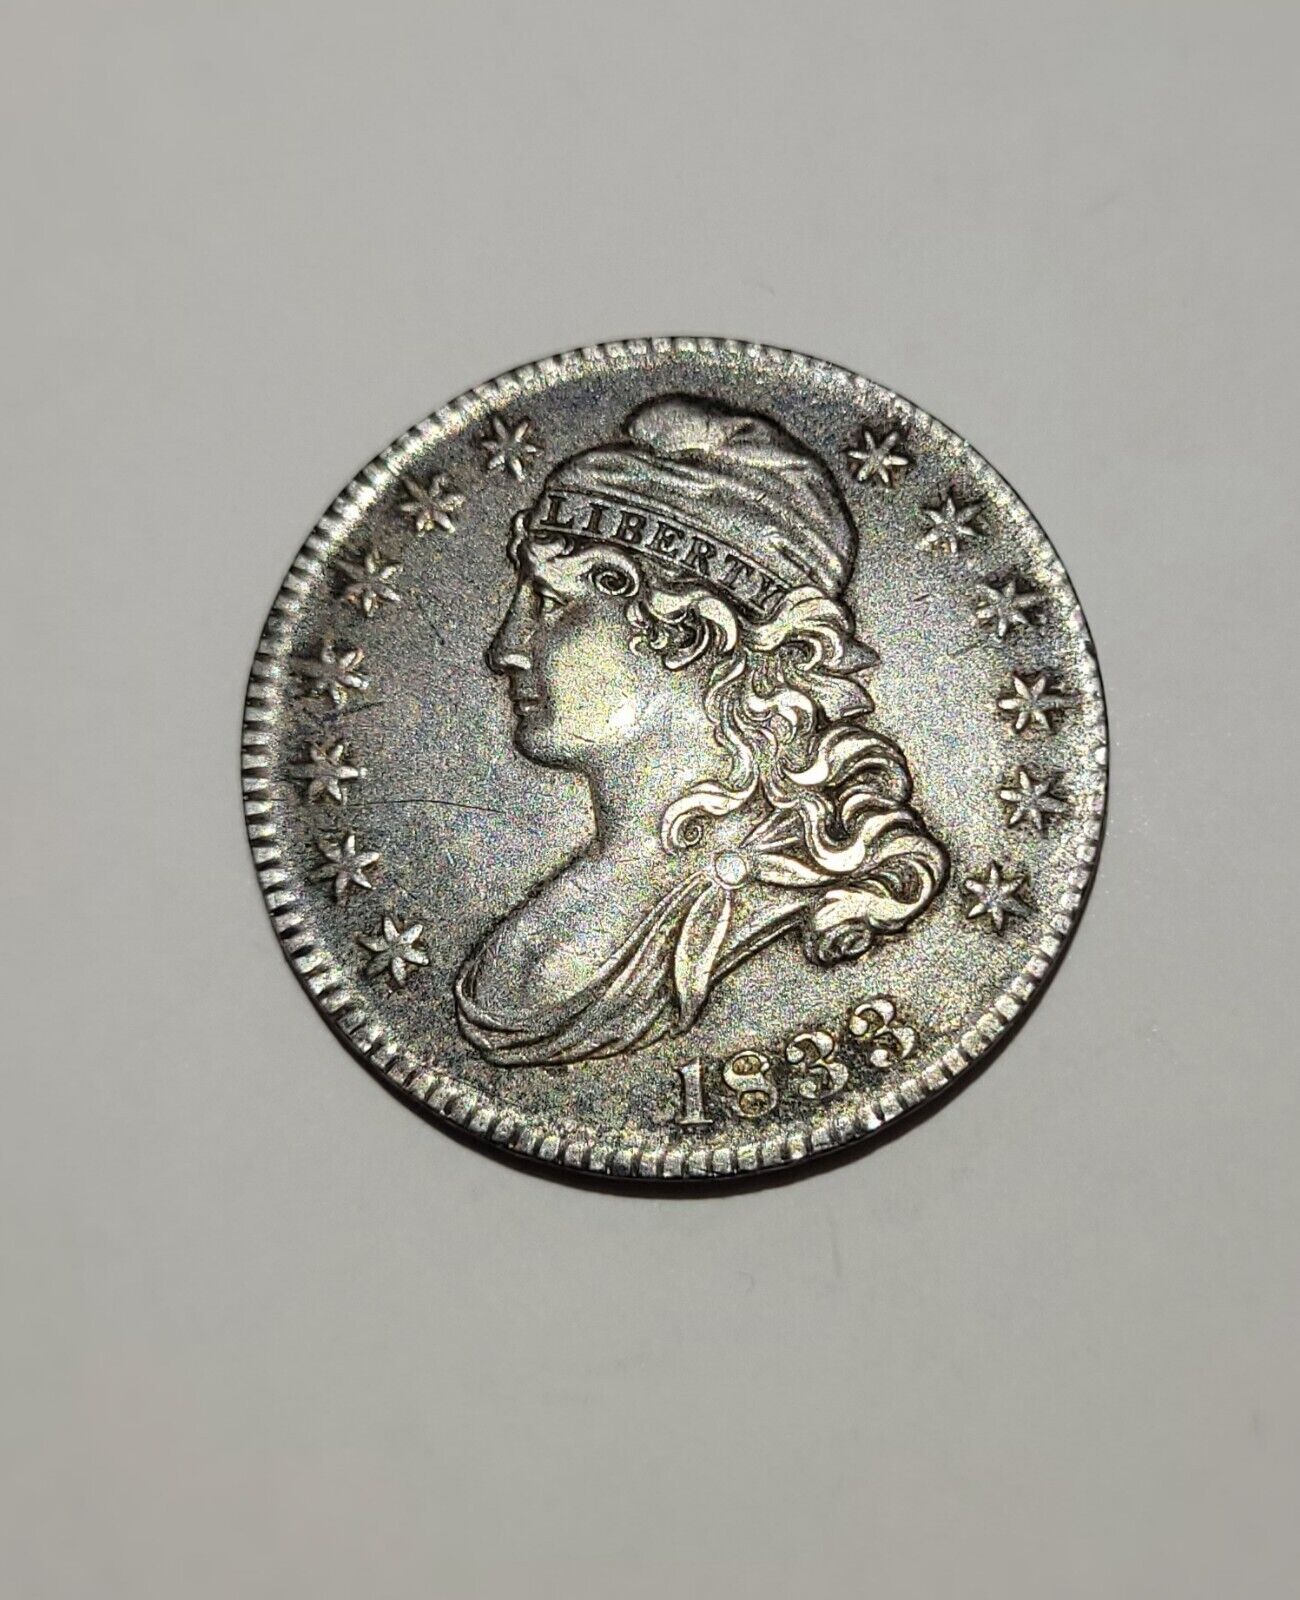 EE choice Extra Fine 1833 Duper Coin- Great Features get it while gettin’s good!